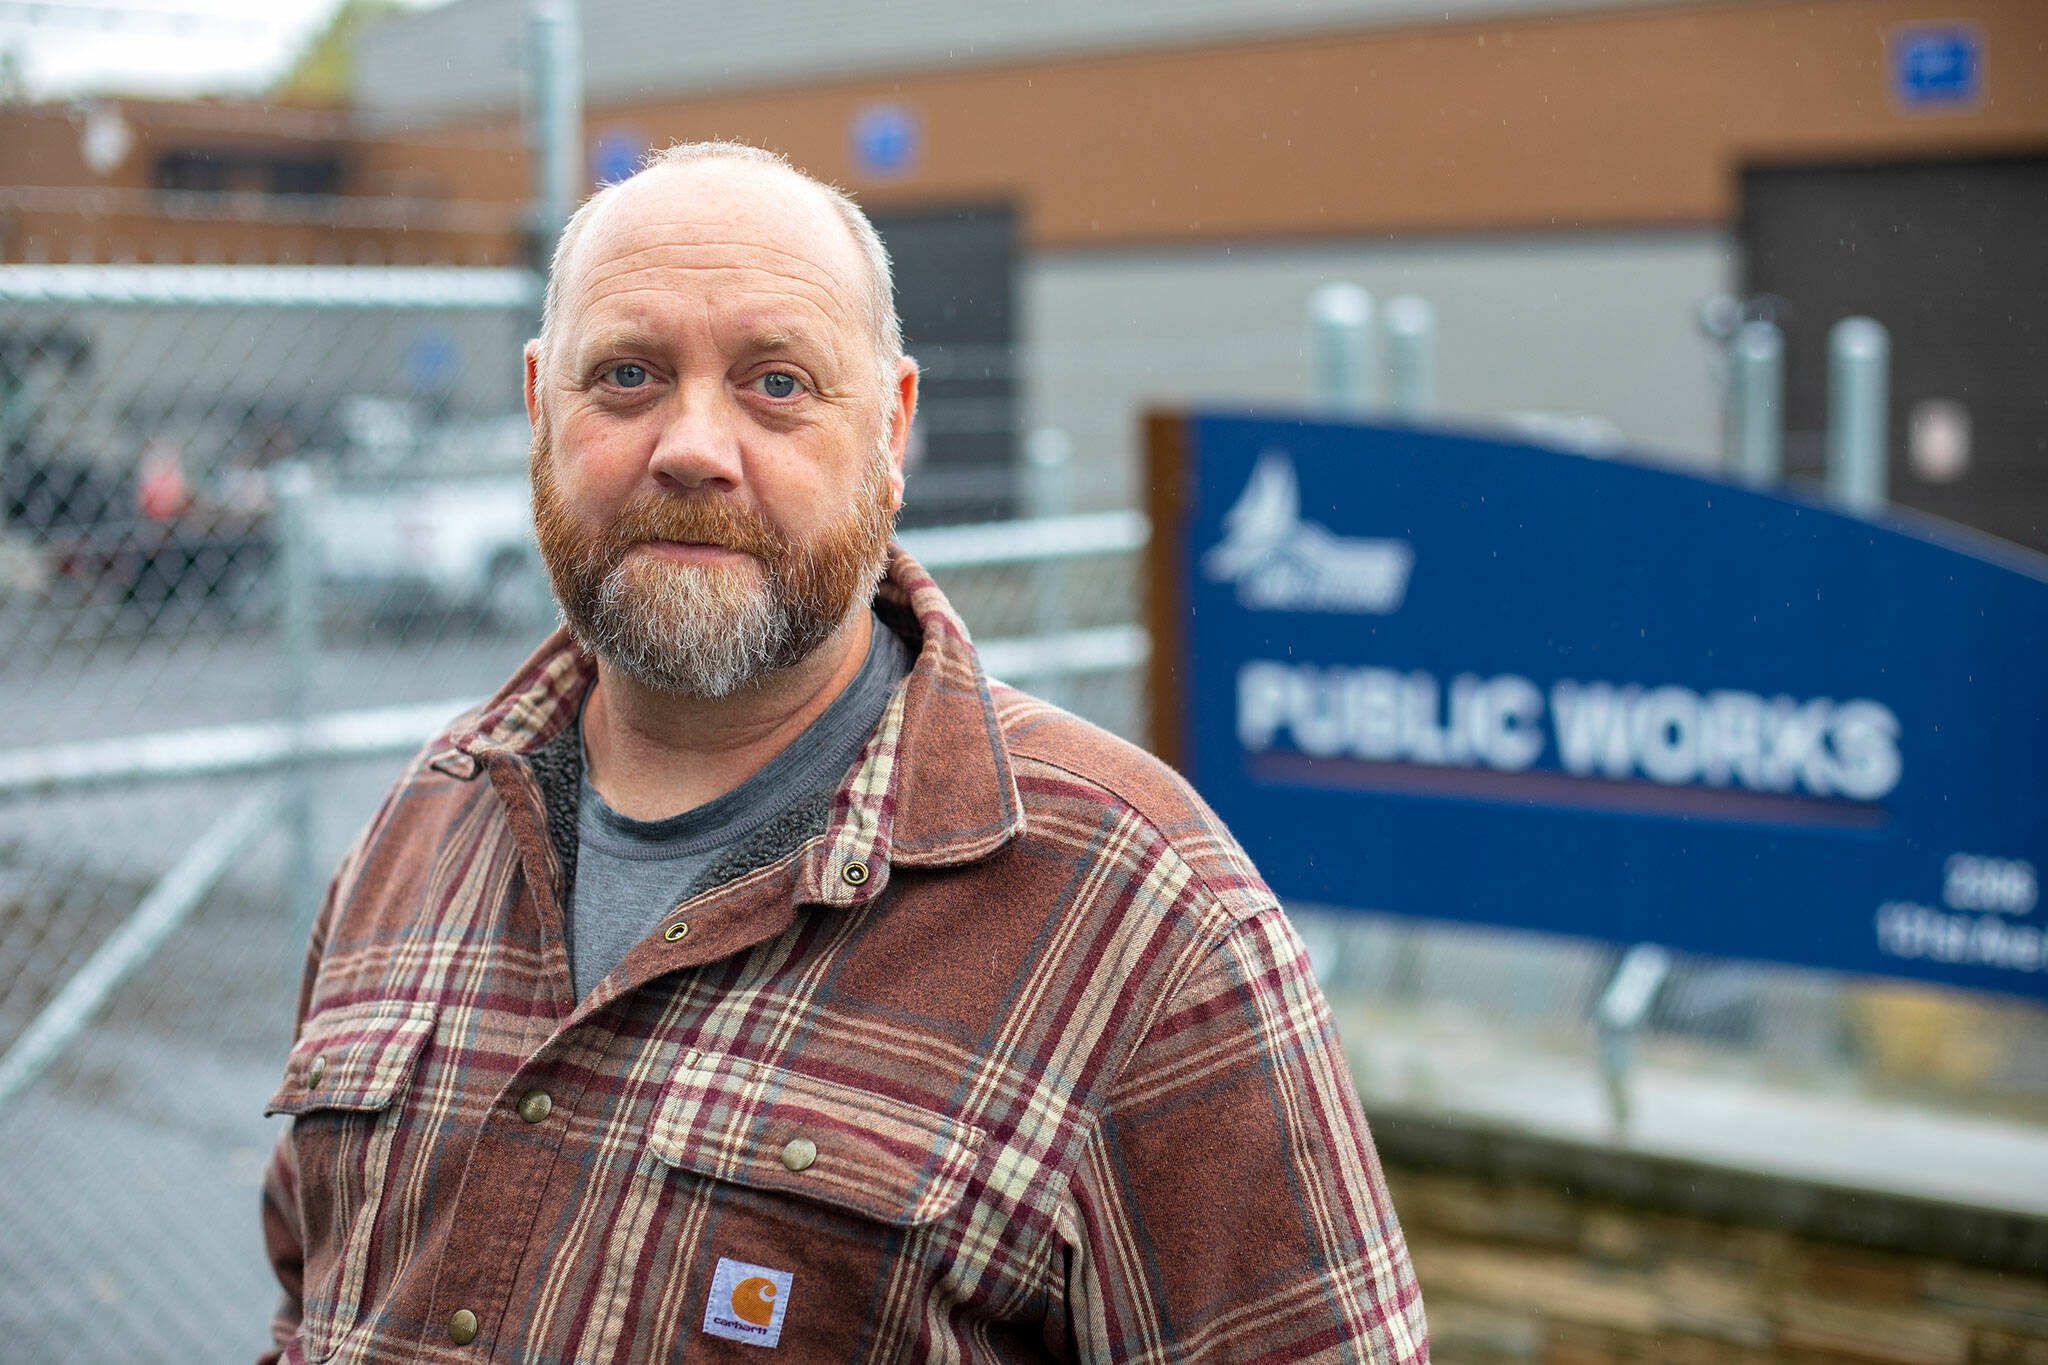 Mike Bredstrand, who is trying to get back his job with Lake Stevens Public Works, stands in front of the department’s building on Wednesday, Sept. 27, 2023, in Lake Stevens, Washington. Bredstrand believes his firing in July was an unwarranted act of revenge by the city. (Ryan Berry / The Herald)